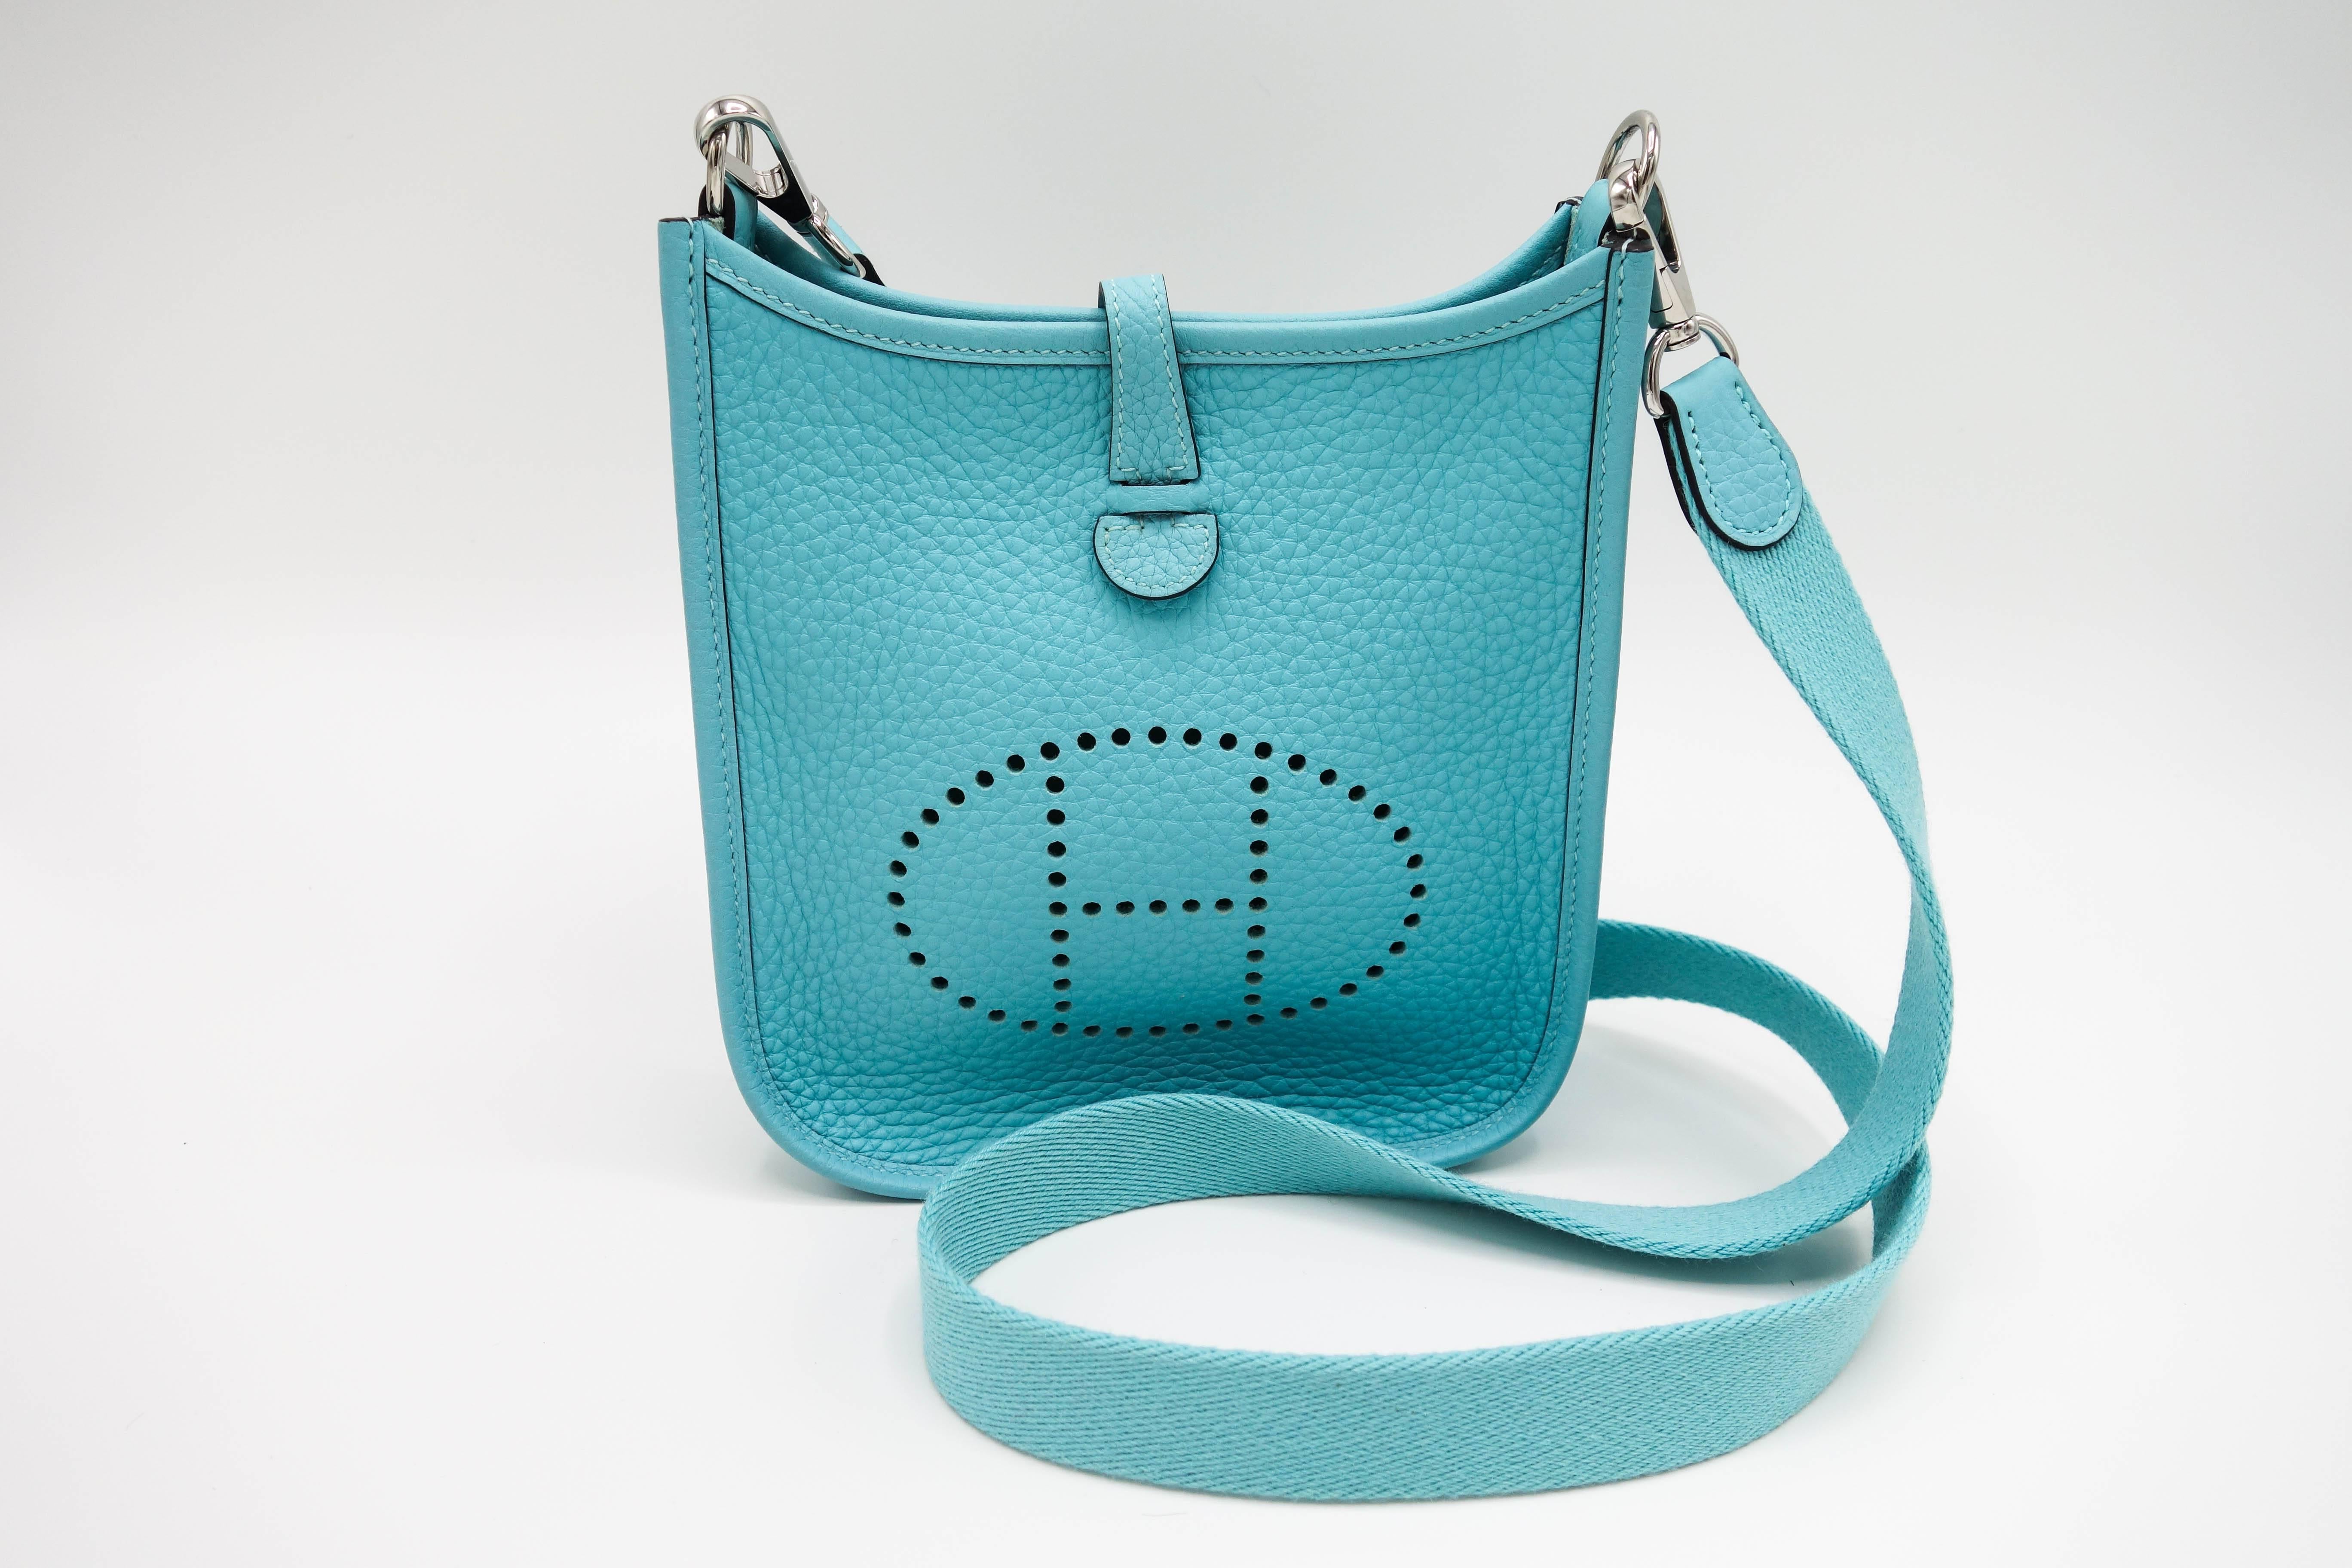 New in box rare Hermès Blue Atolle Mini Evelyne Clemence cross body bag with palladium hardware.  The mini Evelyne has a large perforated iconic "H" in a circle at the front, a top closure that has a snap at the rear and matching